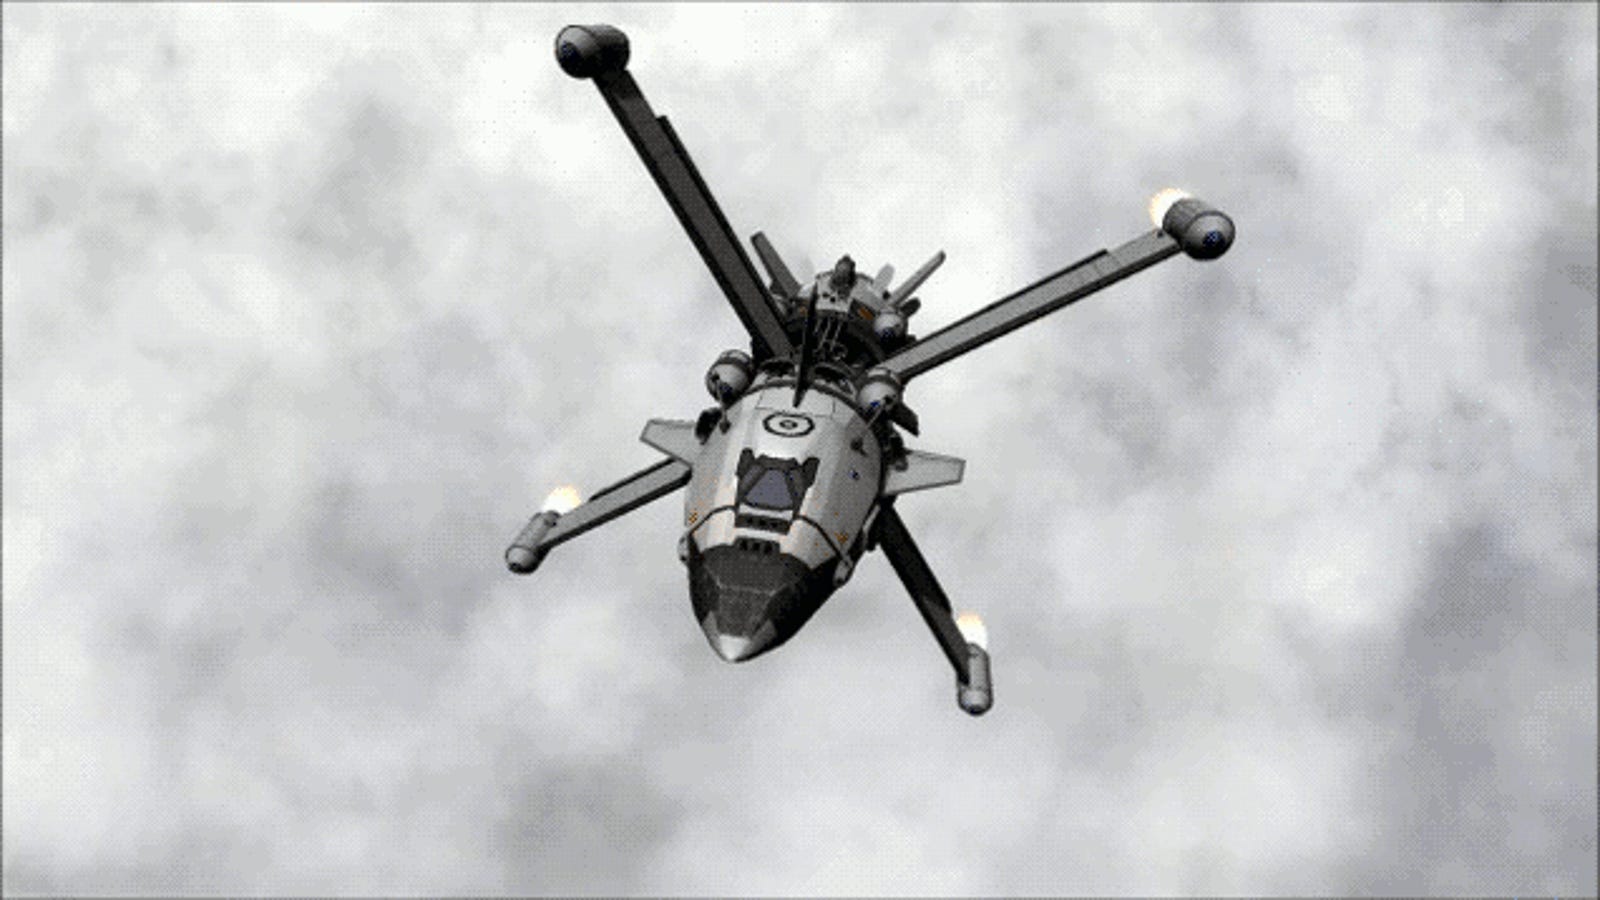 kerbal space program helicopter